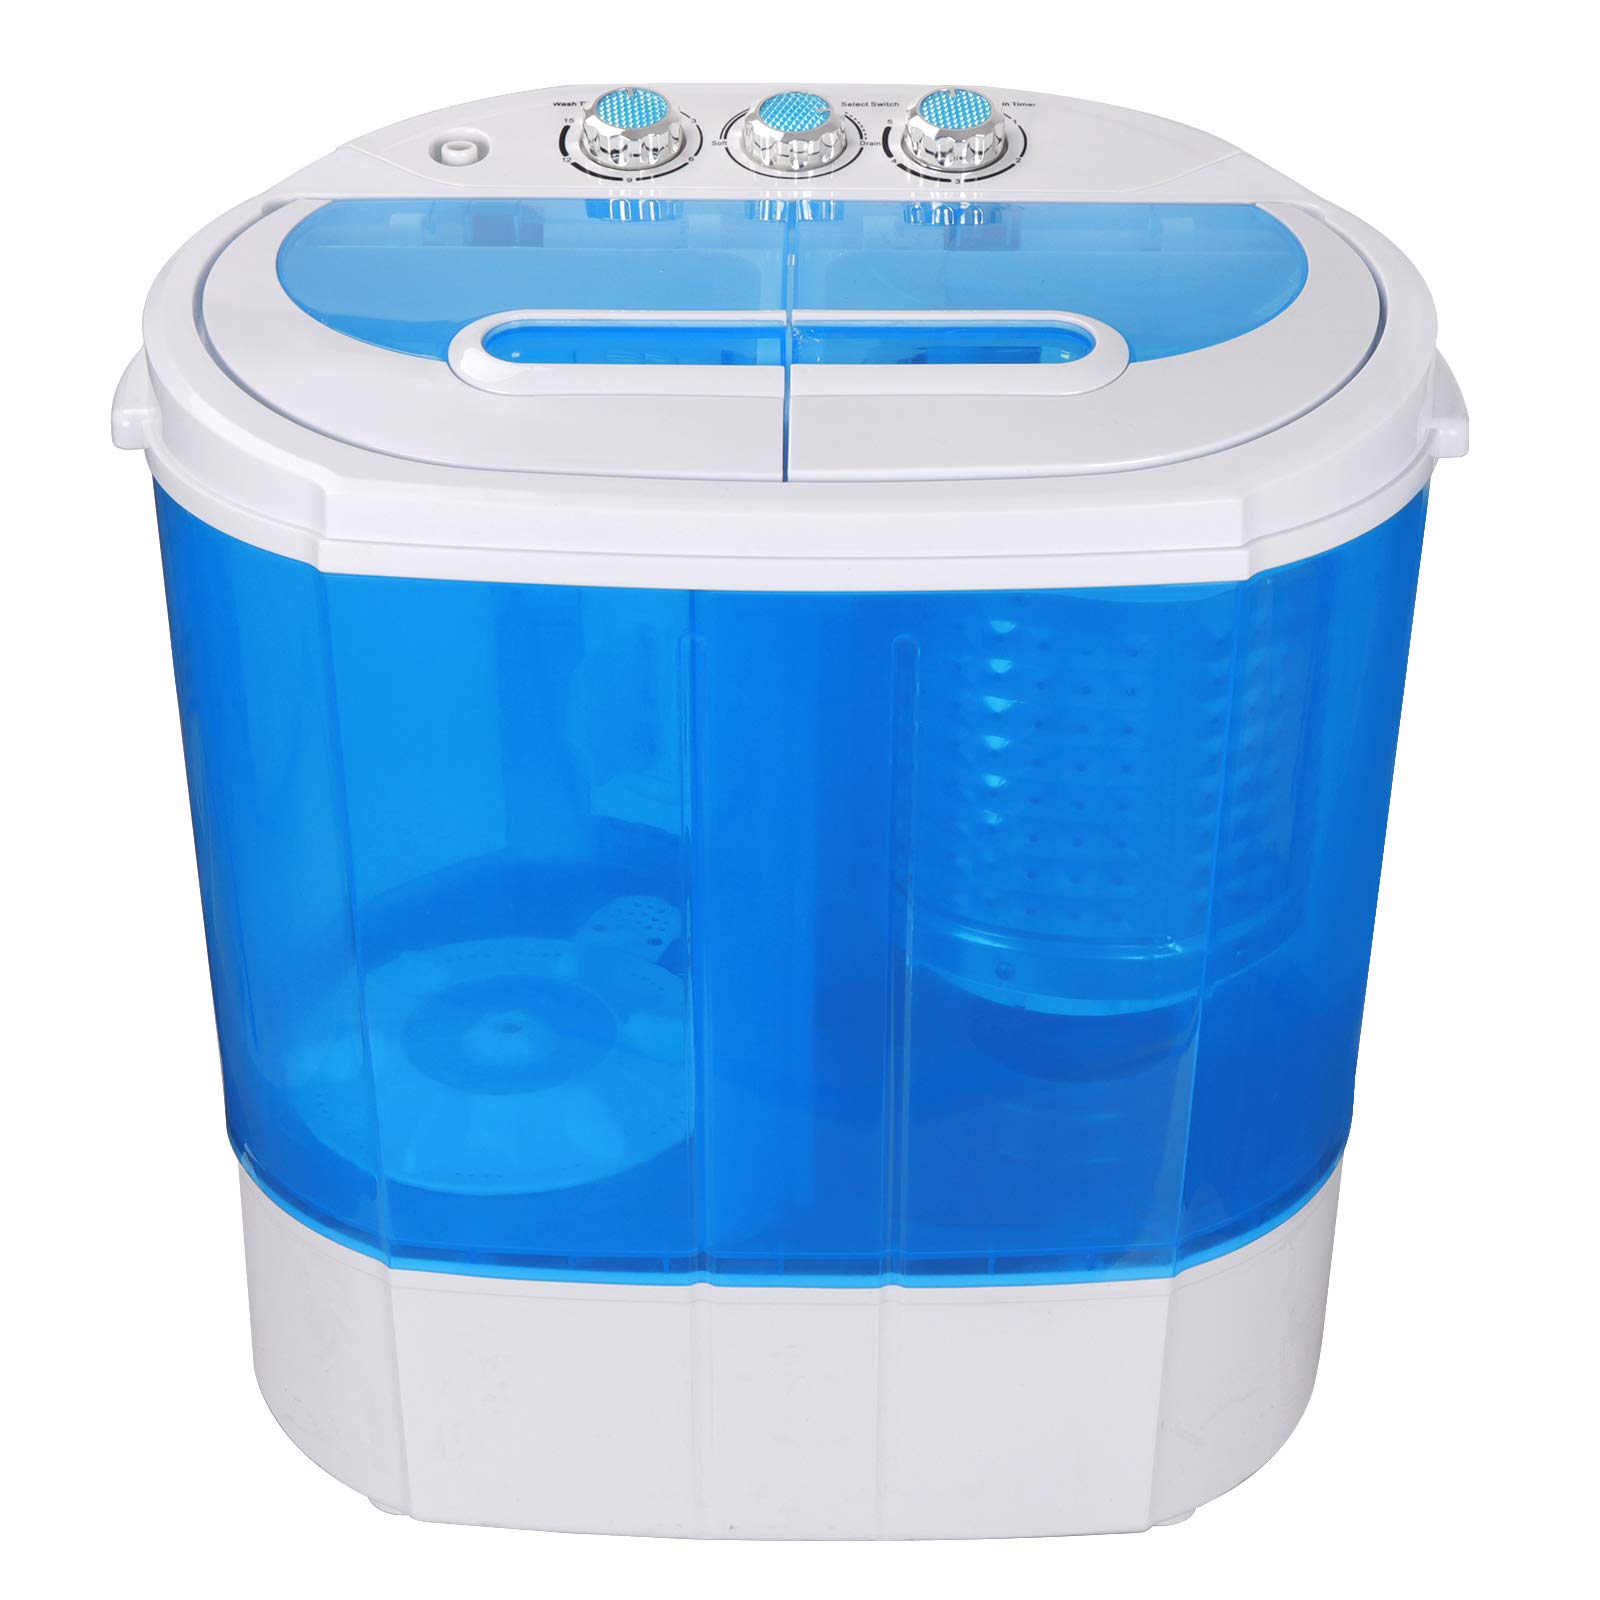 JupiterForce Portable Clothes Washing Machines with Drain Pipe, Mini Compact Twin Tub Spin Dryer Laundry Machine for Bathroom, Dorms, Apartments, Blue